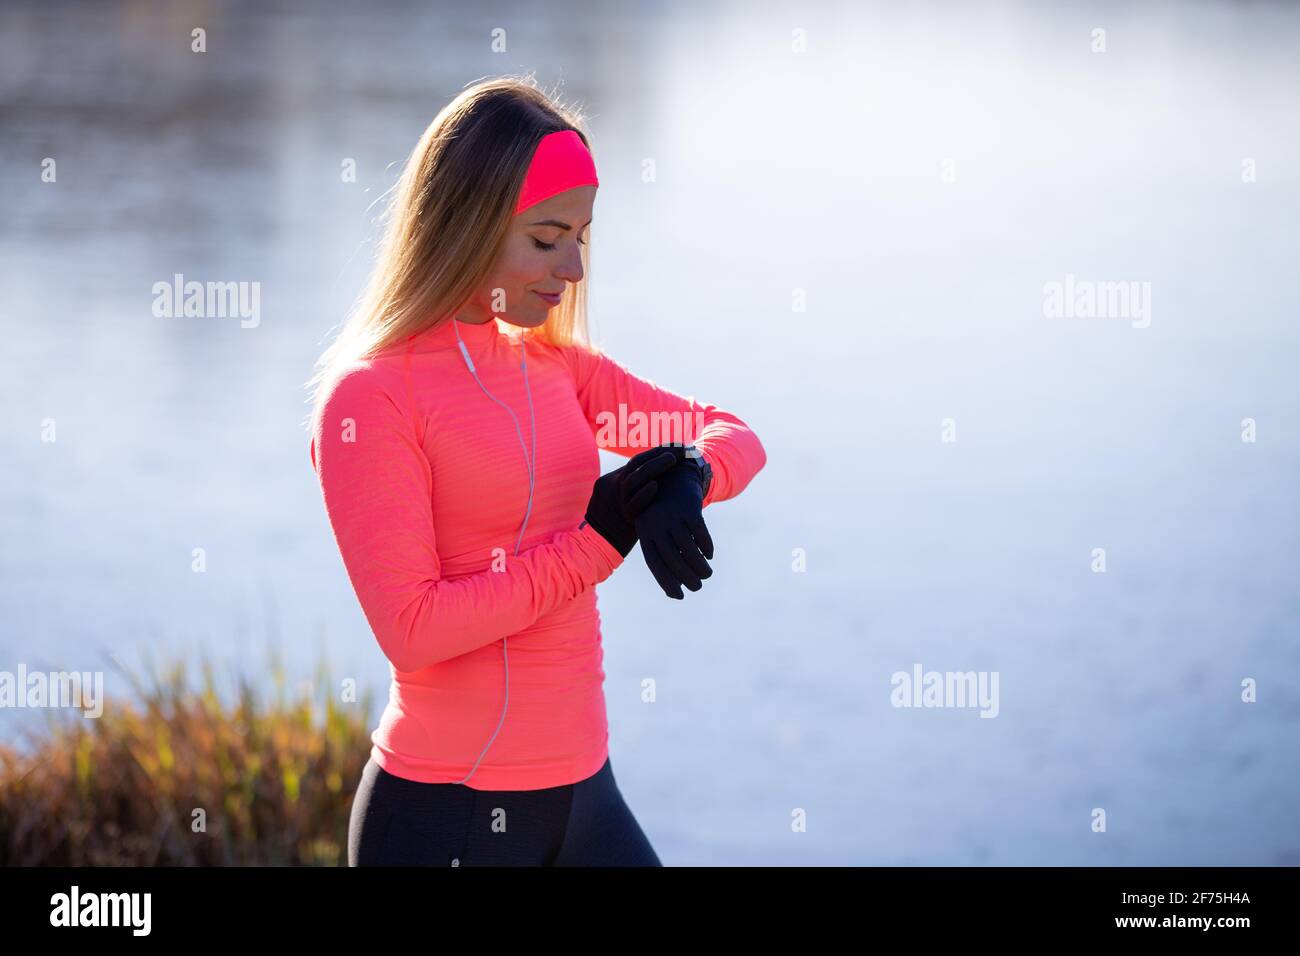 Sporty girl checking out her fitness tracker watch Stock Photo